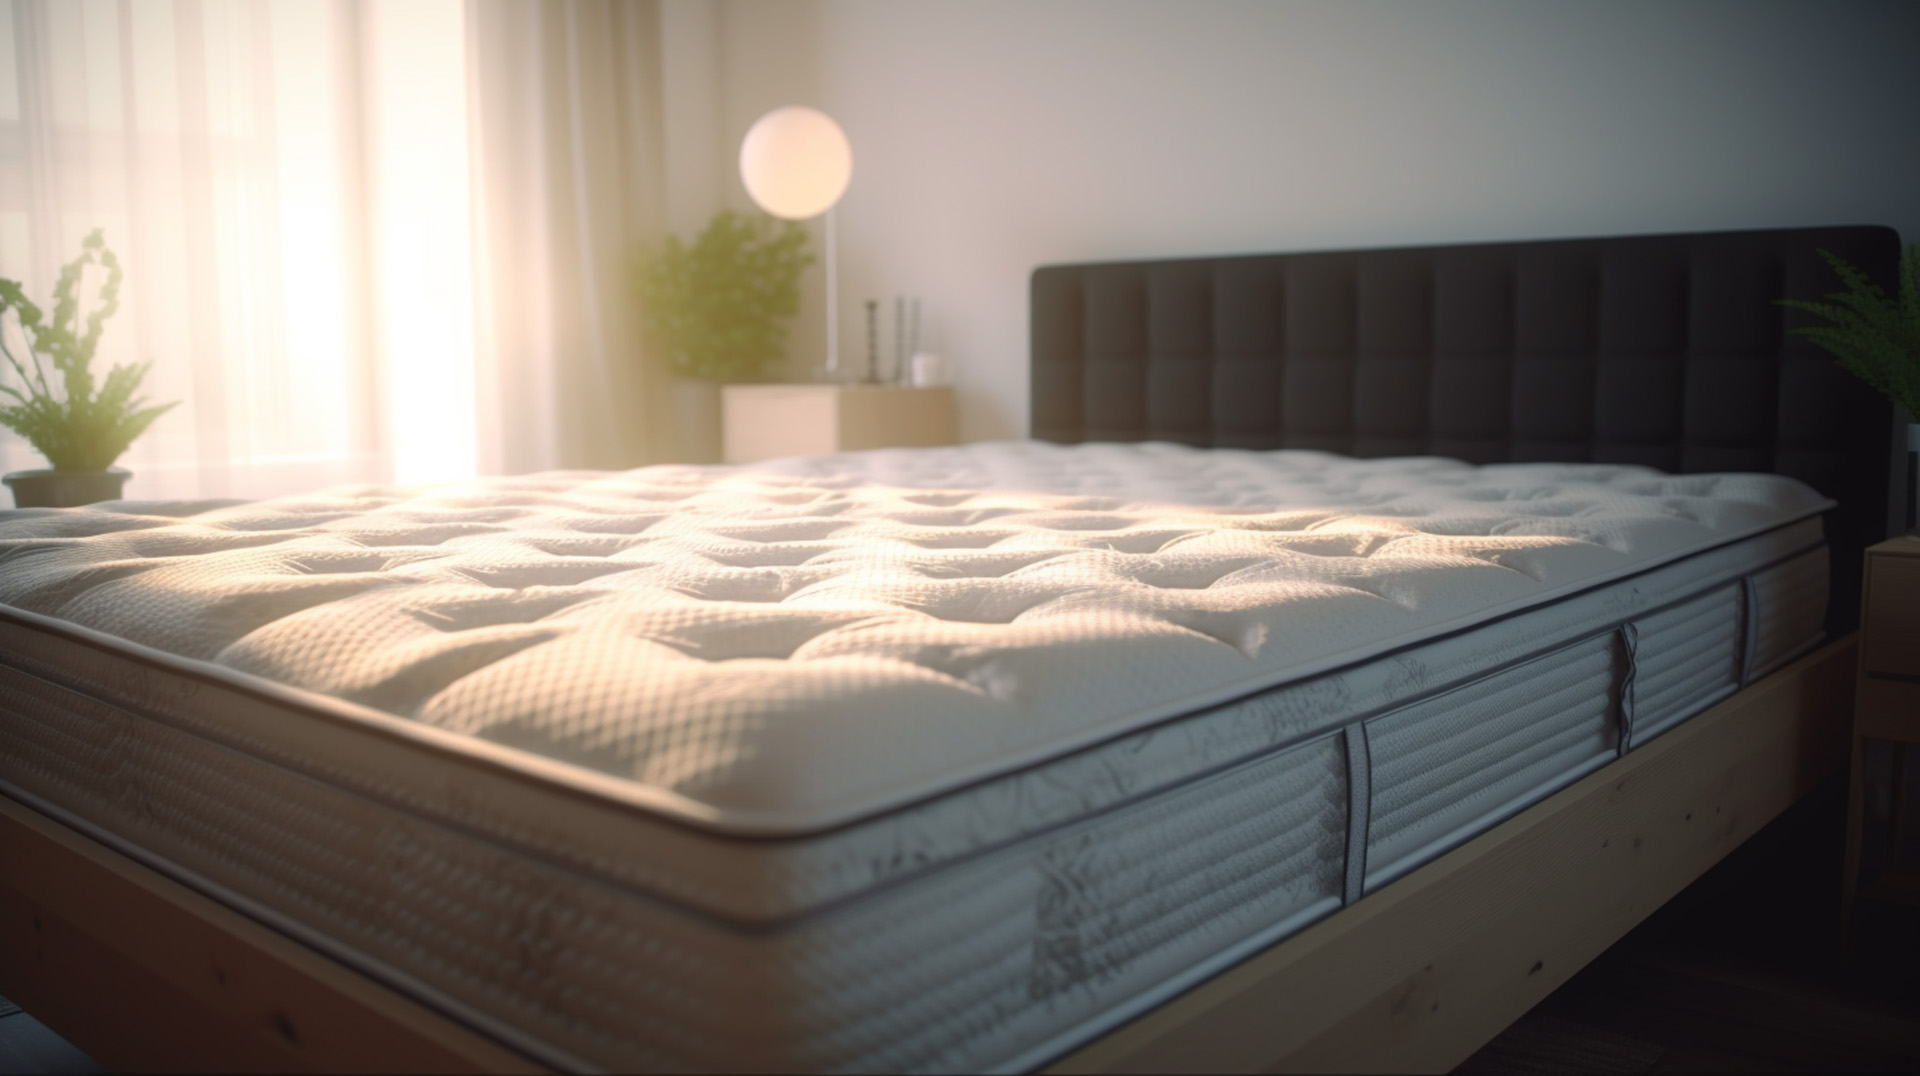 Shop Organic Mattresses and Beds in Clarksville, TN